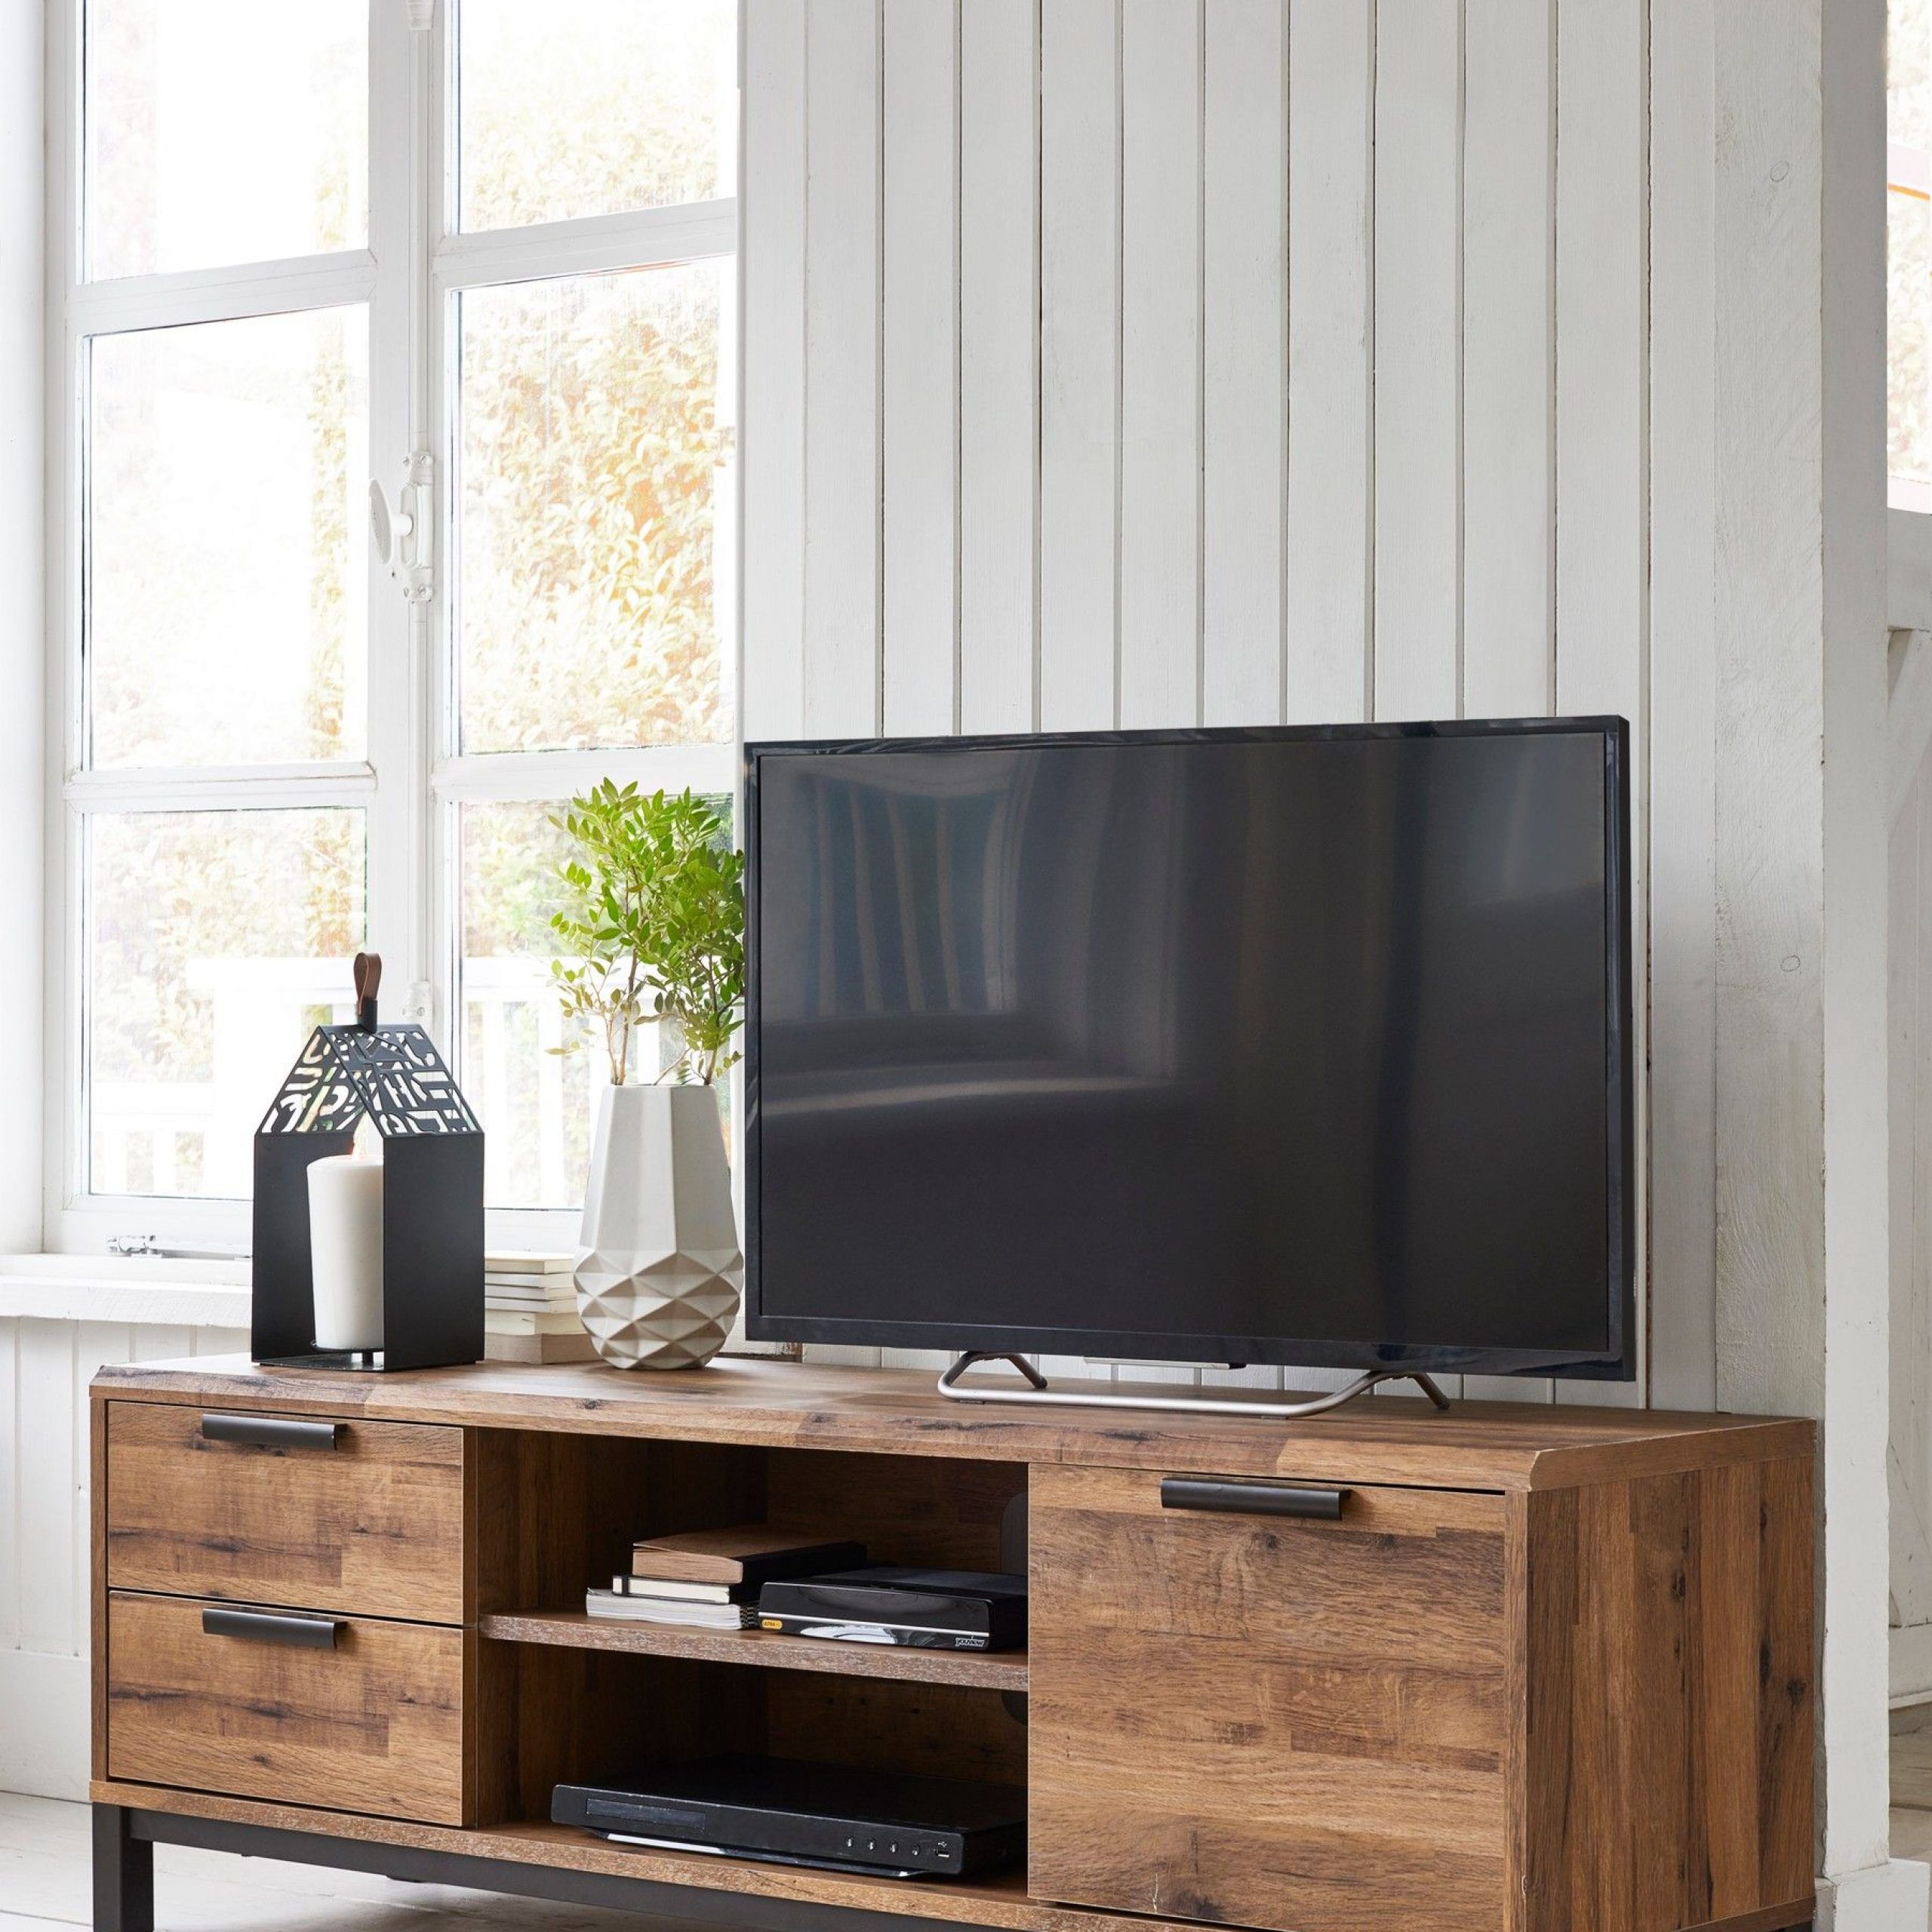 Bronx Wide Tv Stand | Living Room Furniture, Entertainment Regarding Oliver Wide Tv Stands (View 5 of 15)